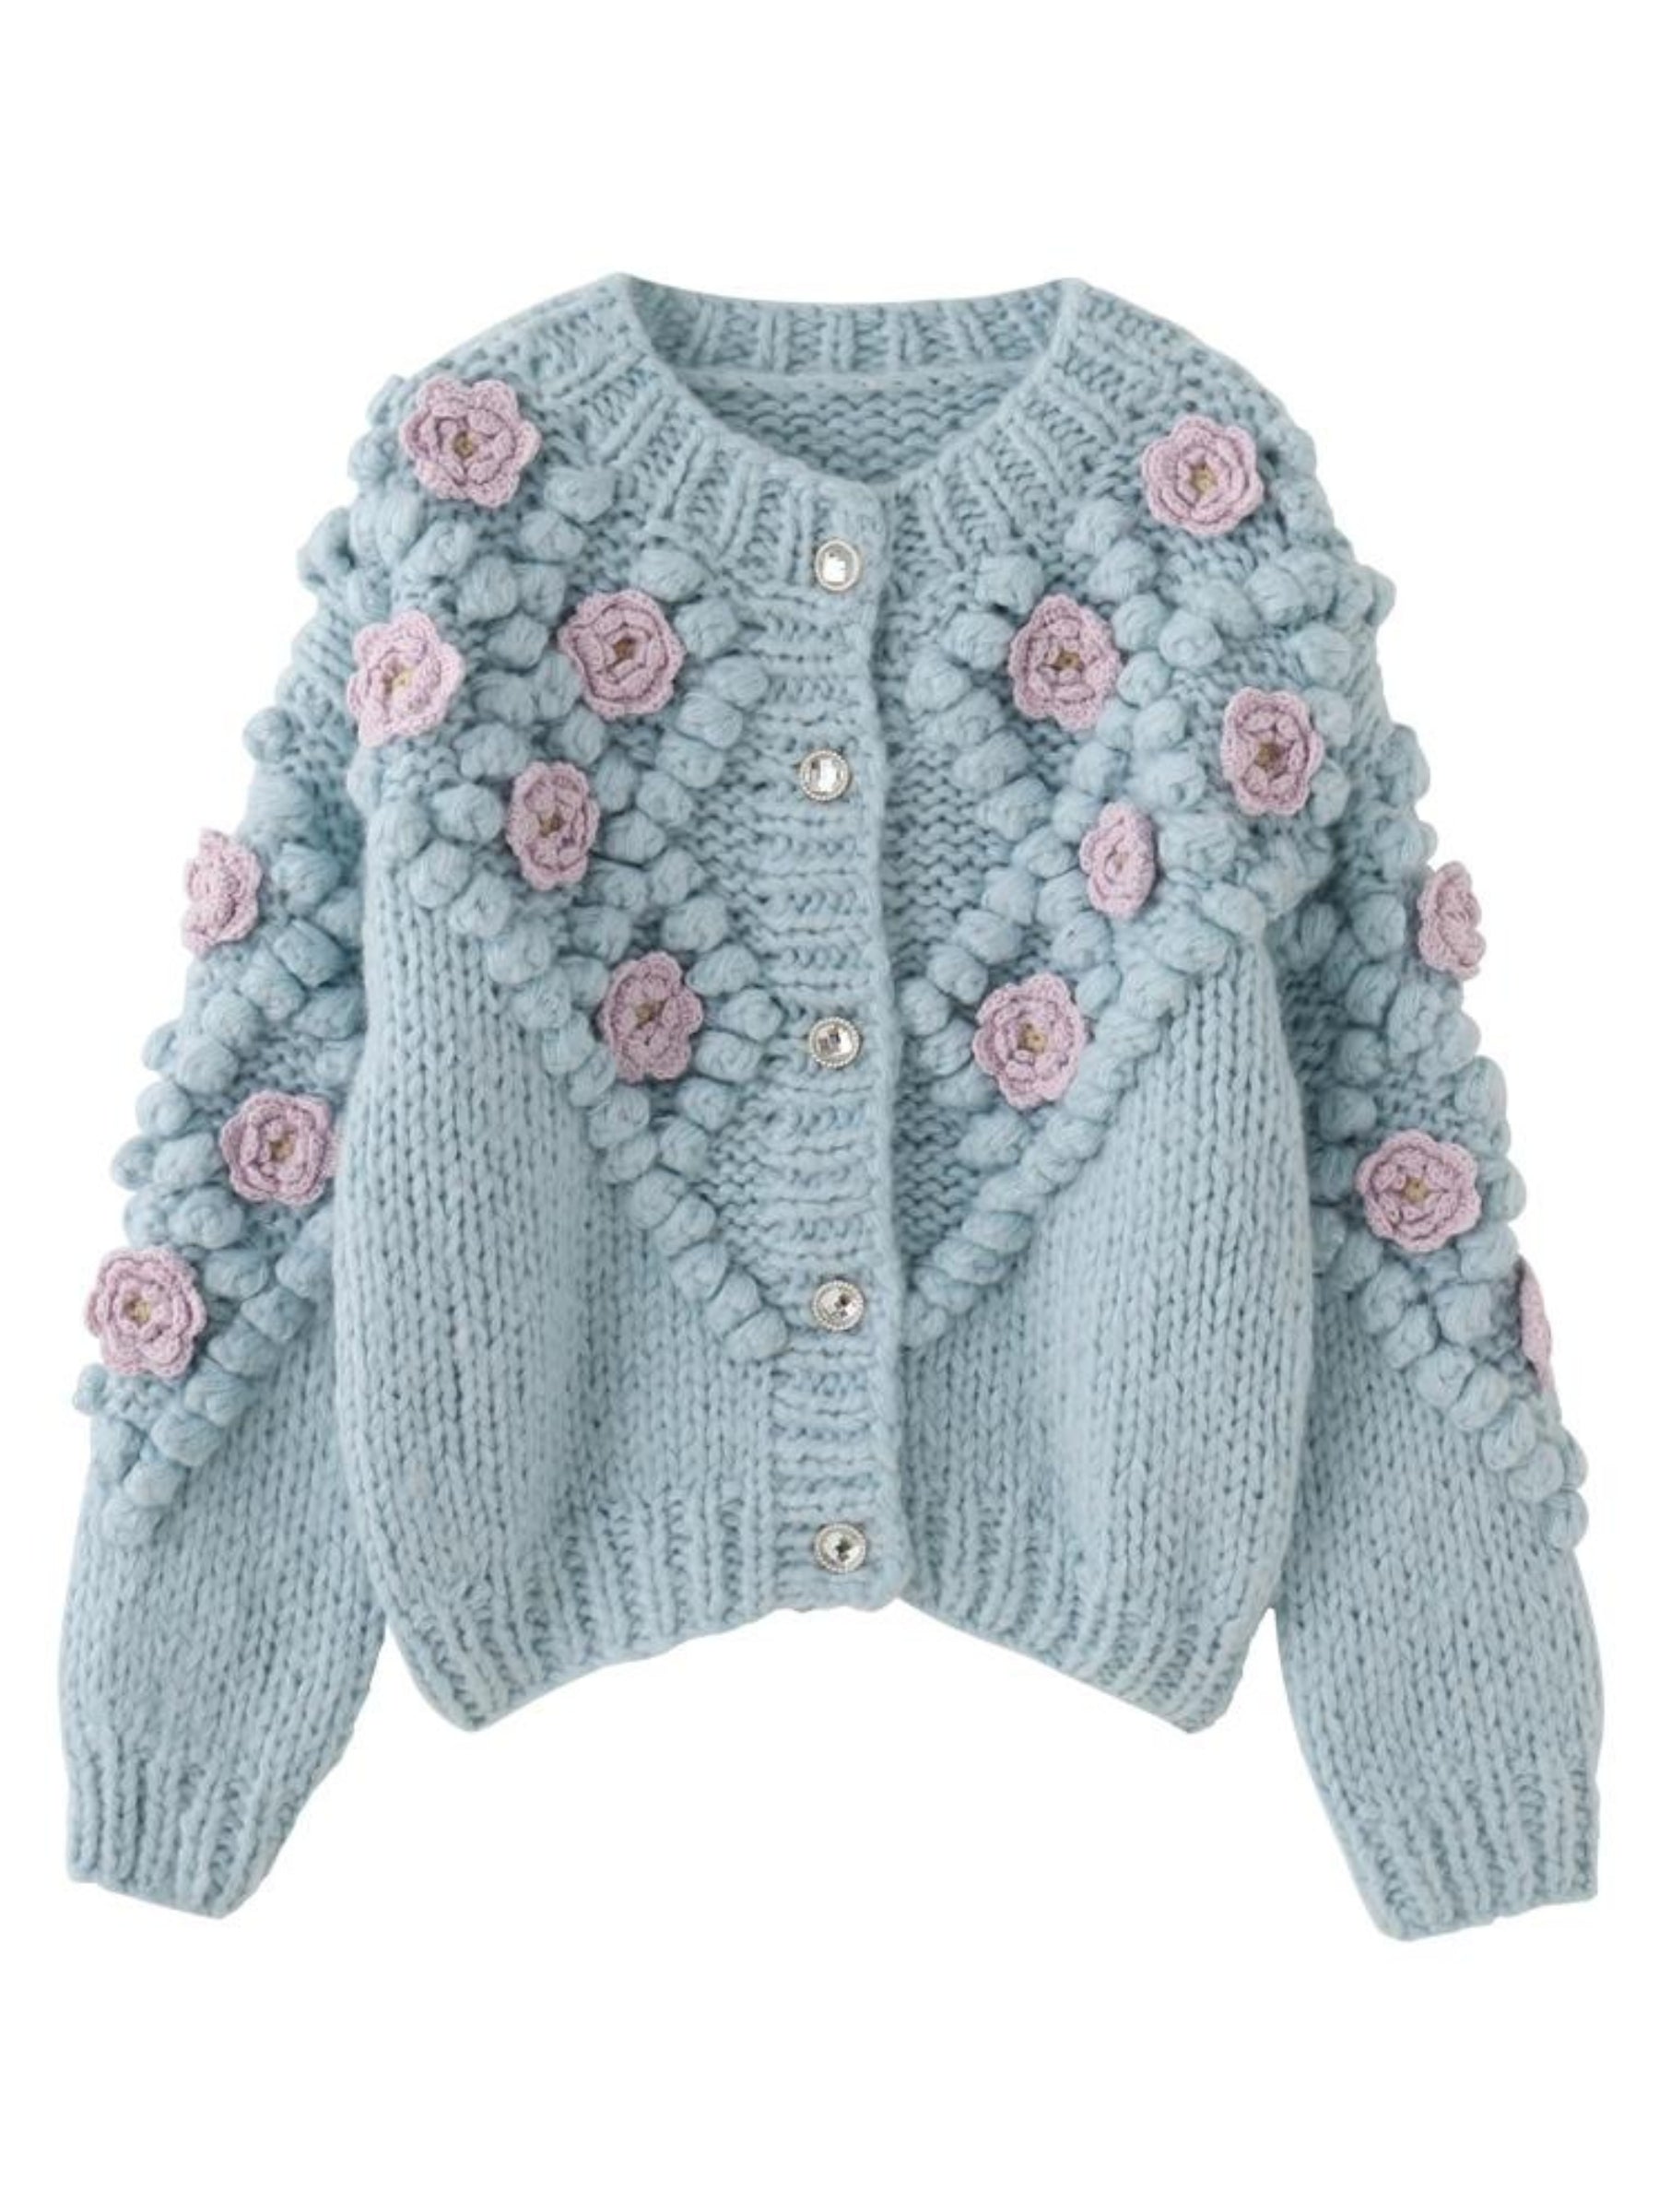 LaPose Fashion - Cidney Handmade Floral Sweater - Cardigan, Knitted Tops, Long Sleeve Tops, Loose Sweaters, Oversize Sweaters, Romantic Tops, Sweaters